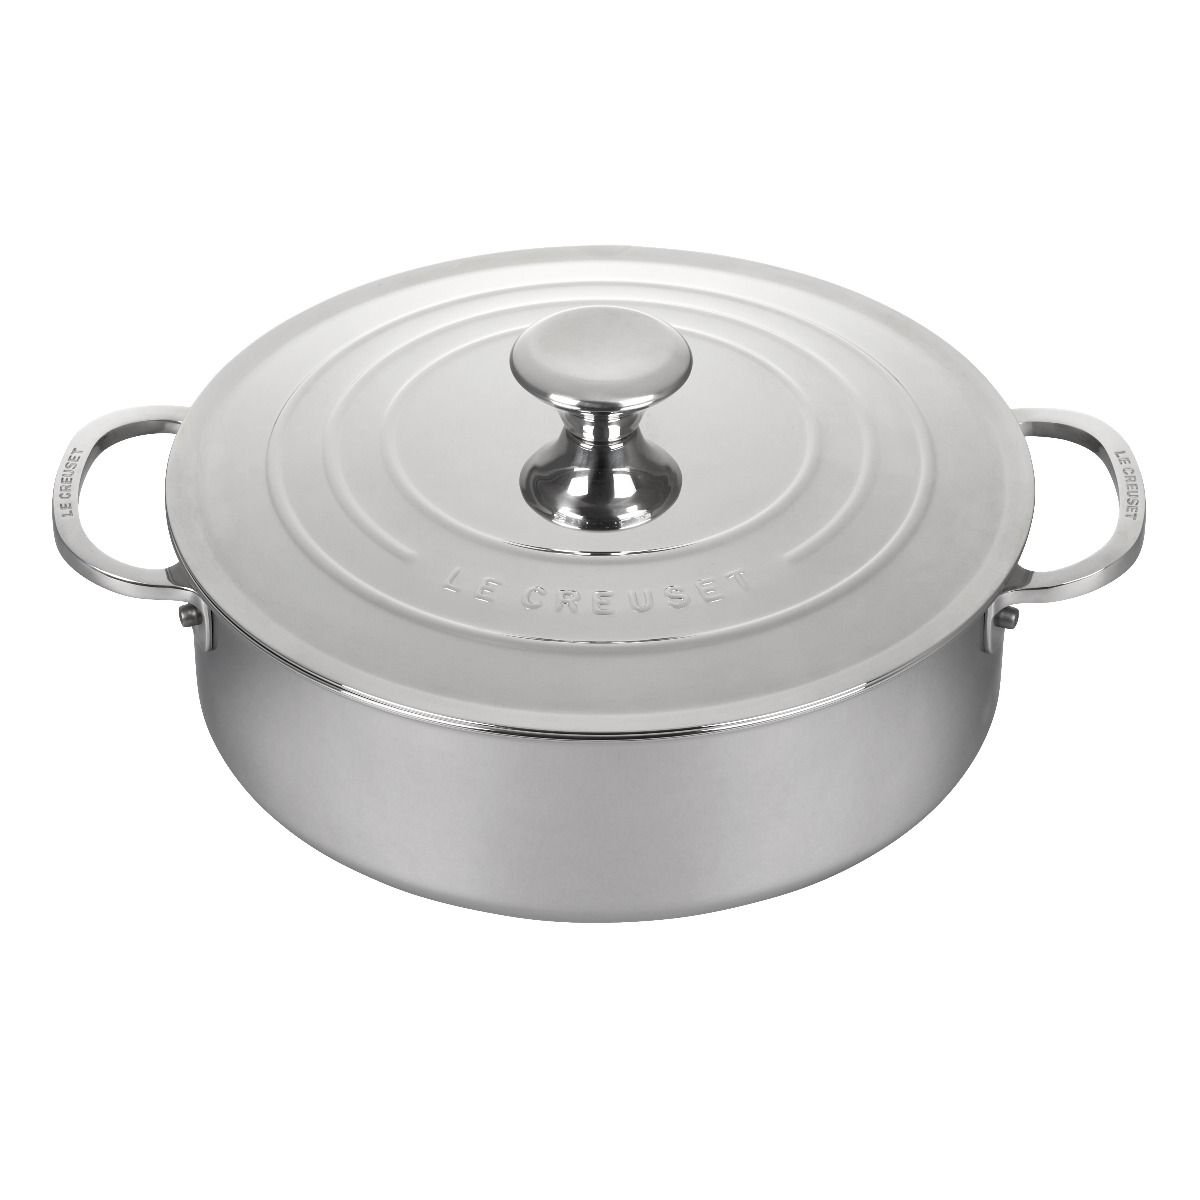  Le Creuset Tri-Ply Stainless Steel 8 Fry Pan, Small: Home &  Kitchen